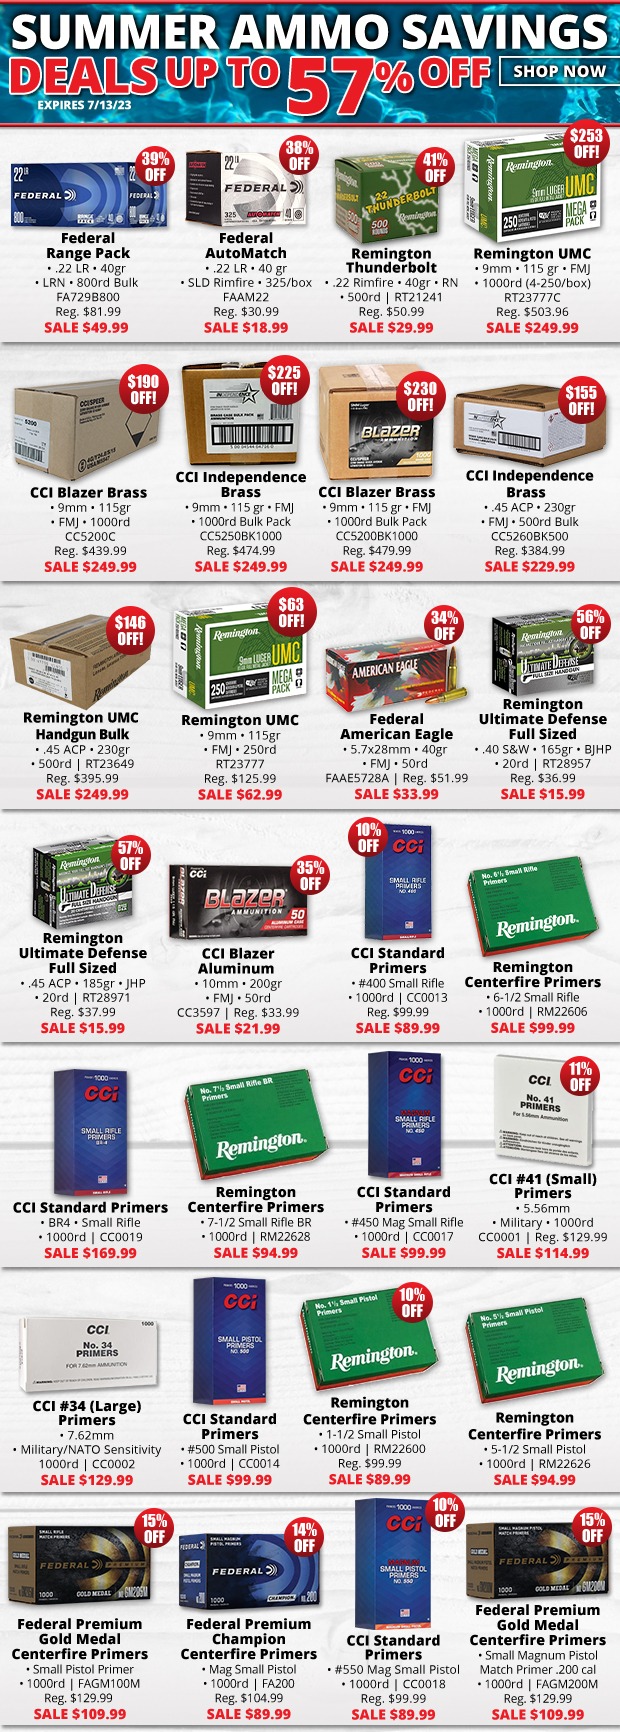 Up to 57% Off Summer Ammo Savings!